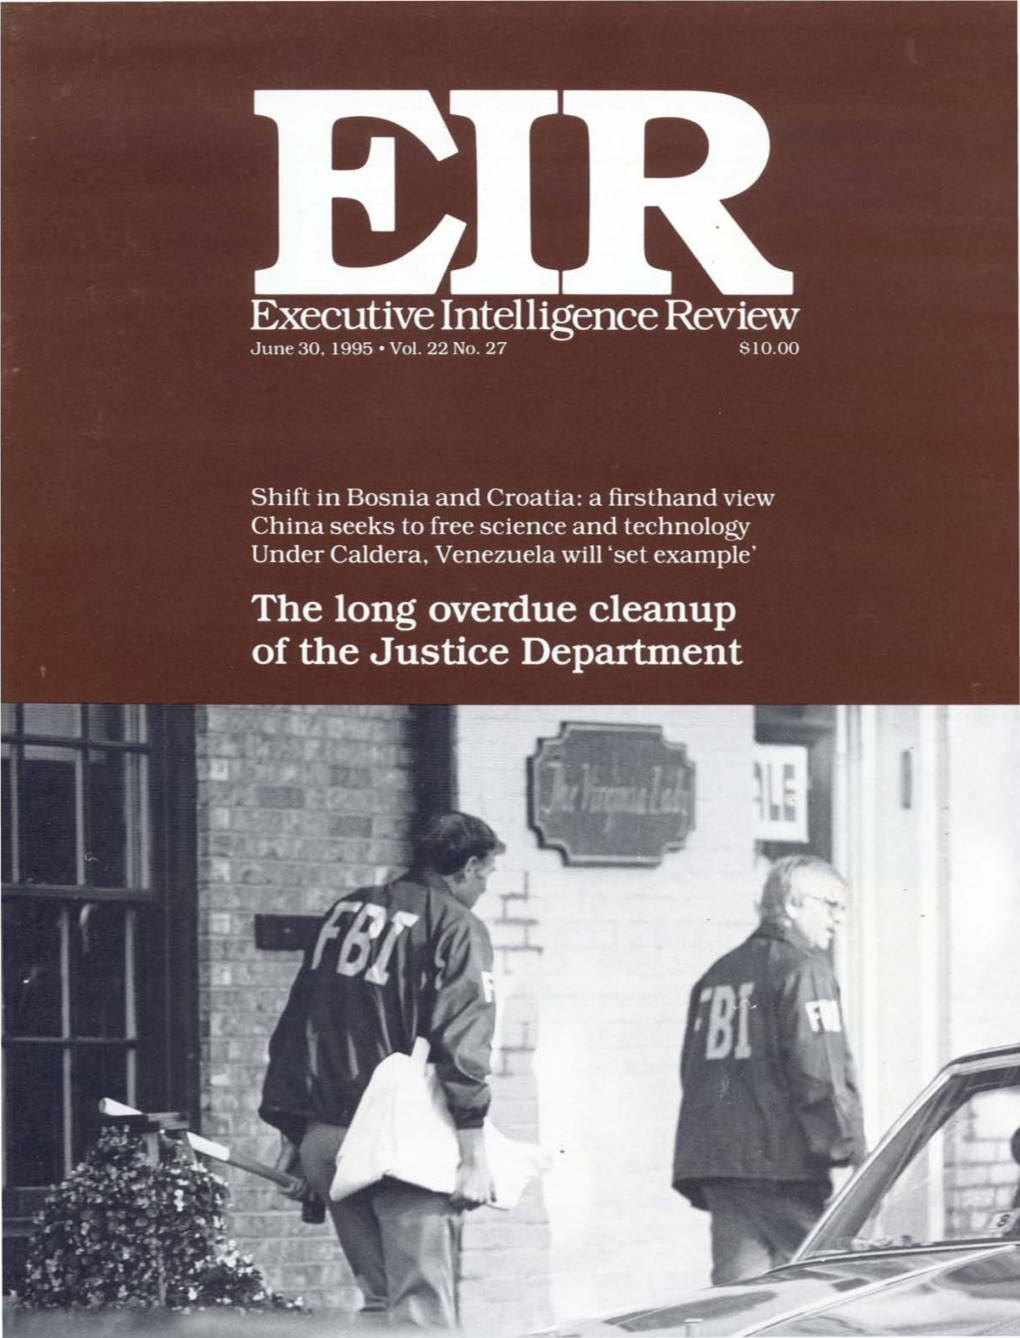 Executive Intelligence Review, Volume 22, Number 27, June 30, 1995